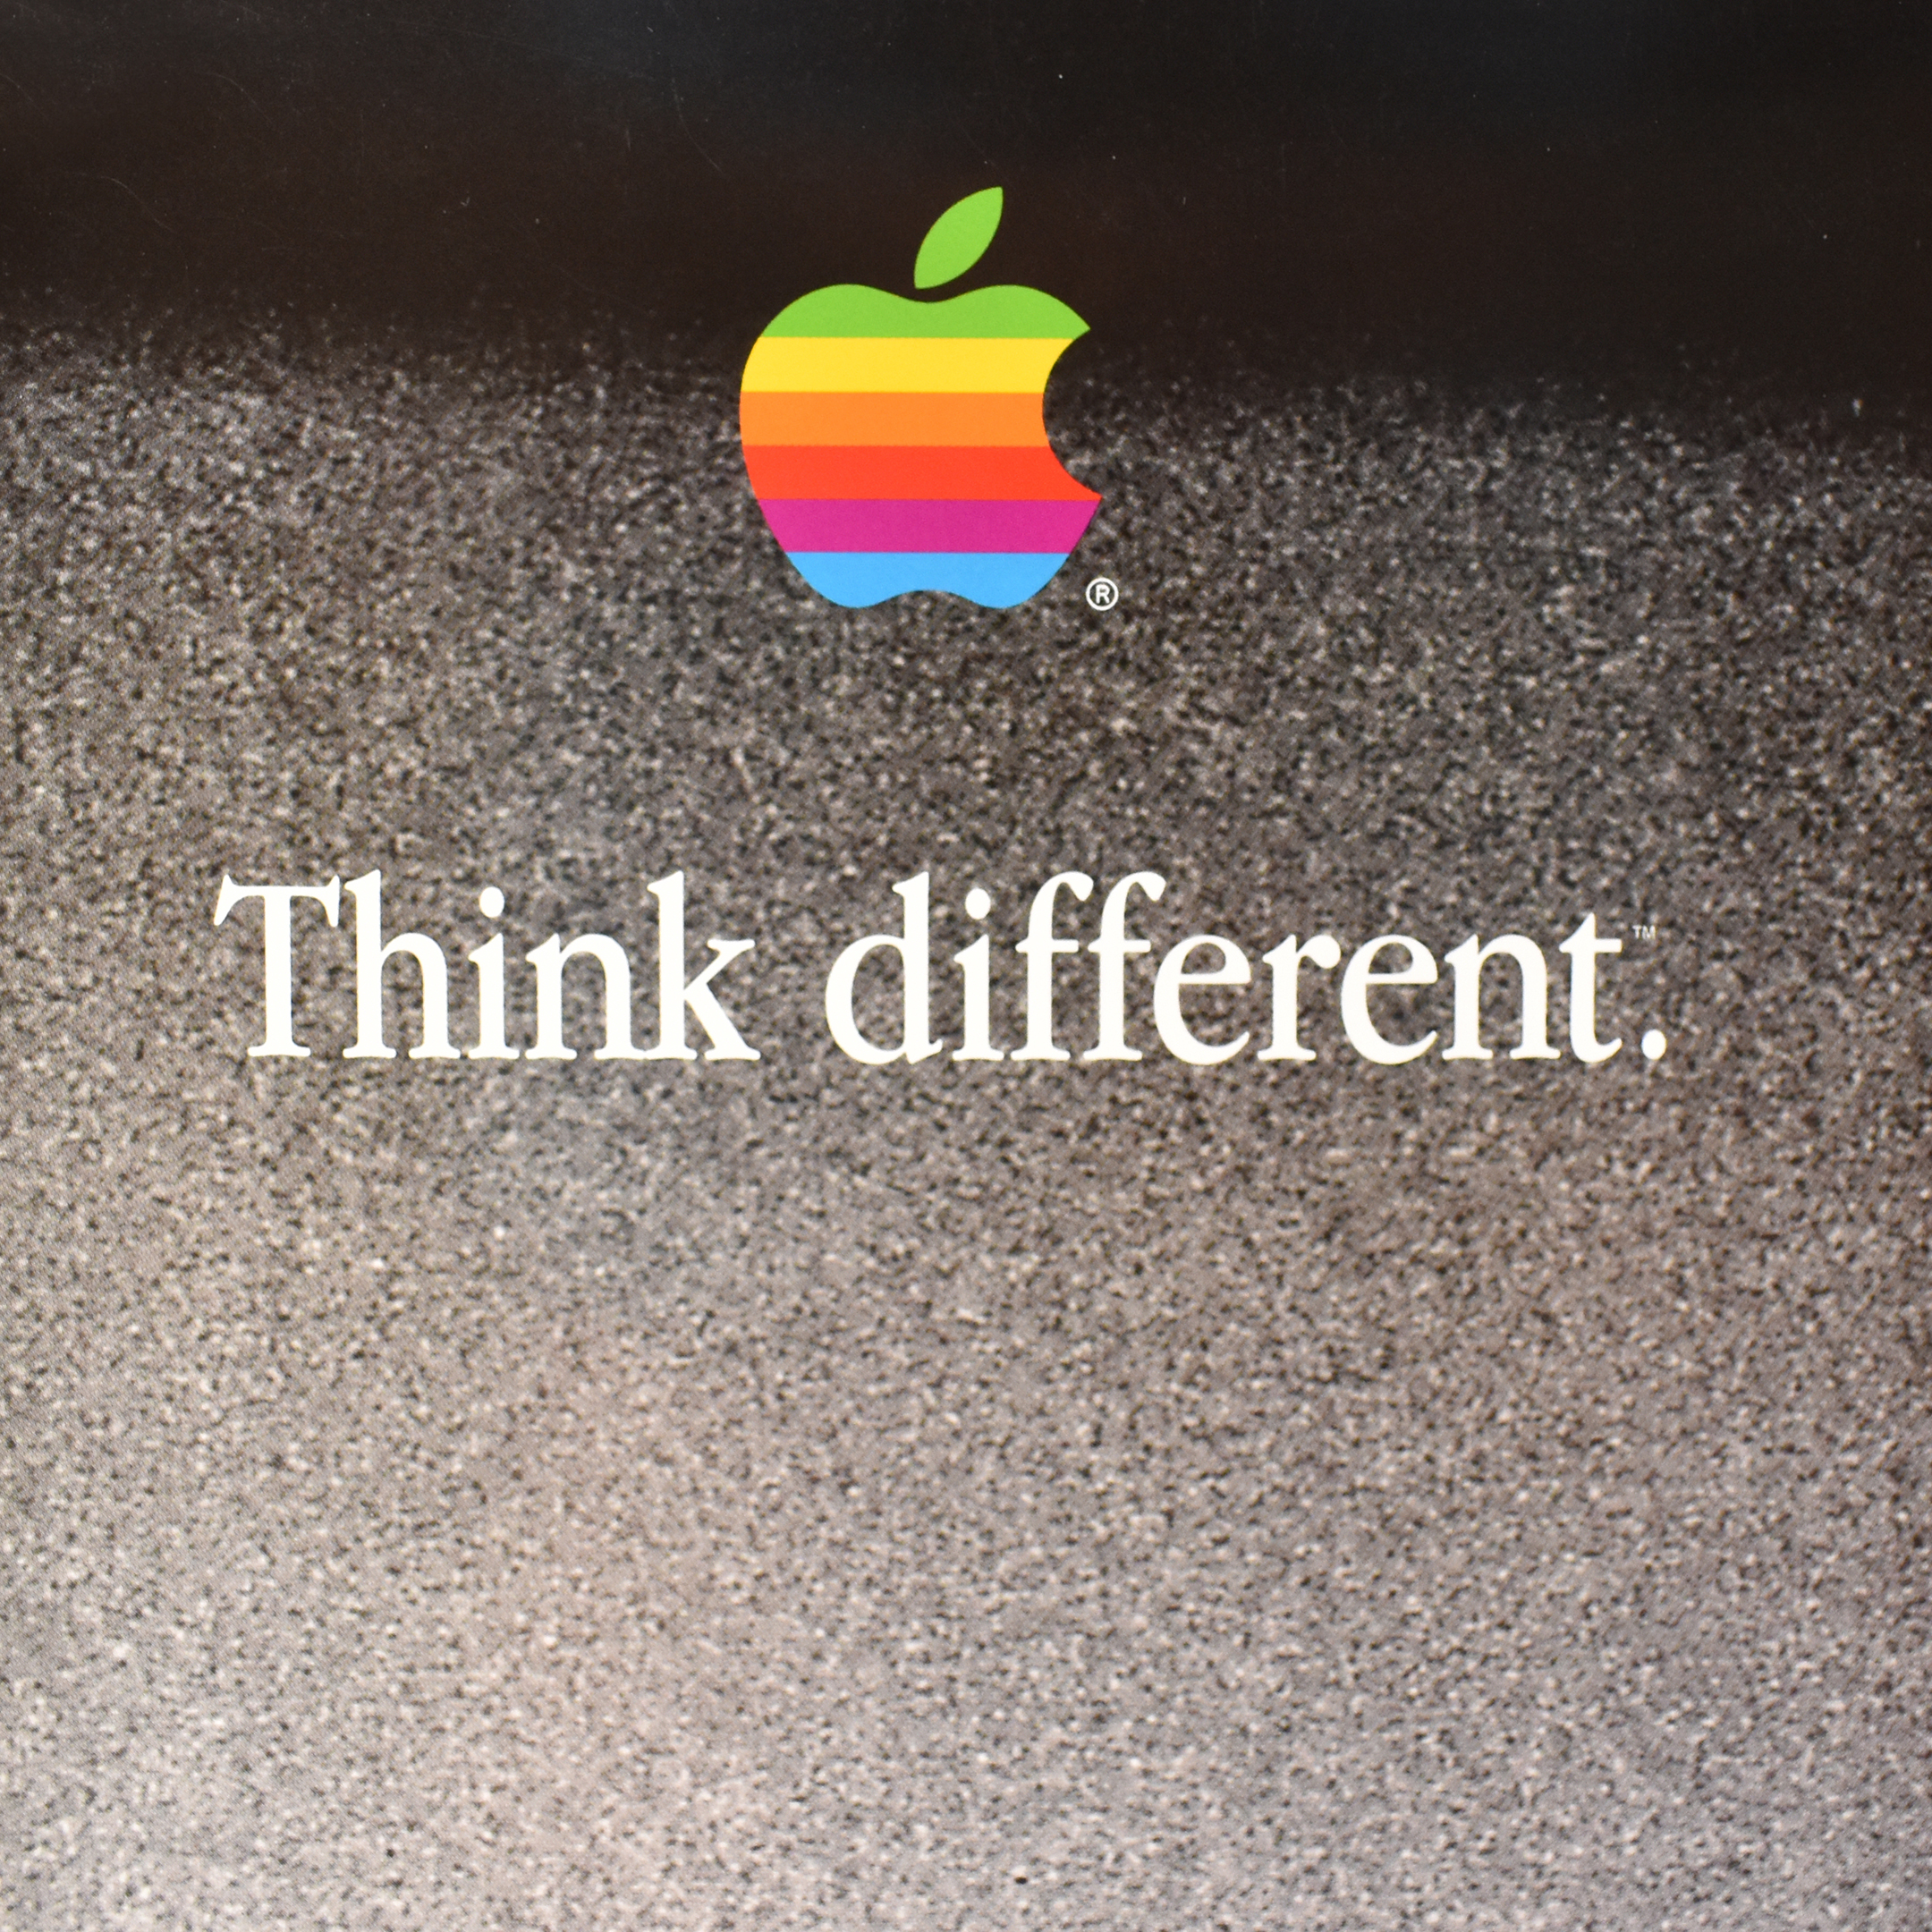 24 x 36 by STEVE JOBS 61 x 91 CM APPLE THINK DIFFERENT POSTER BOB DYLAN 